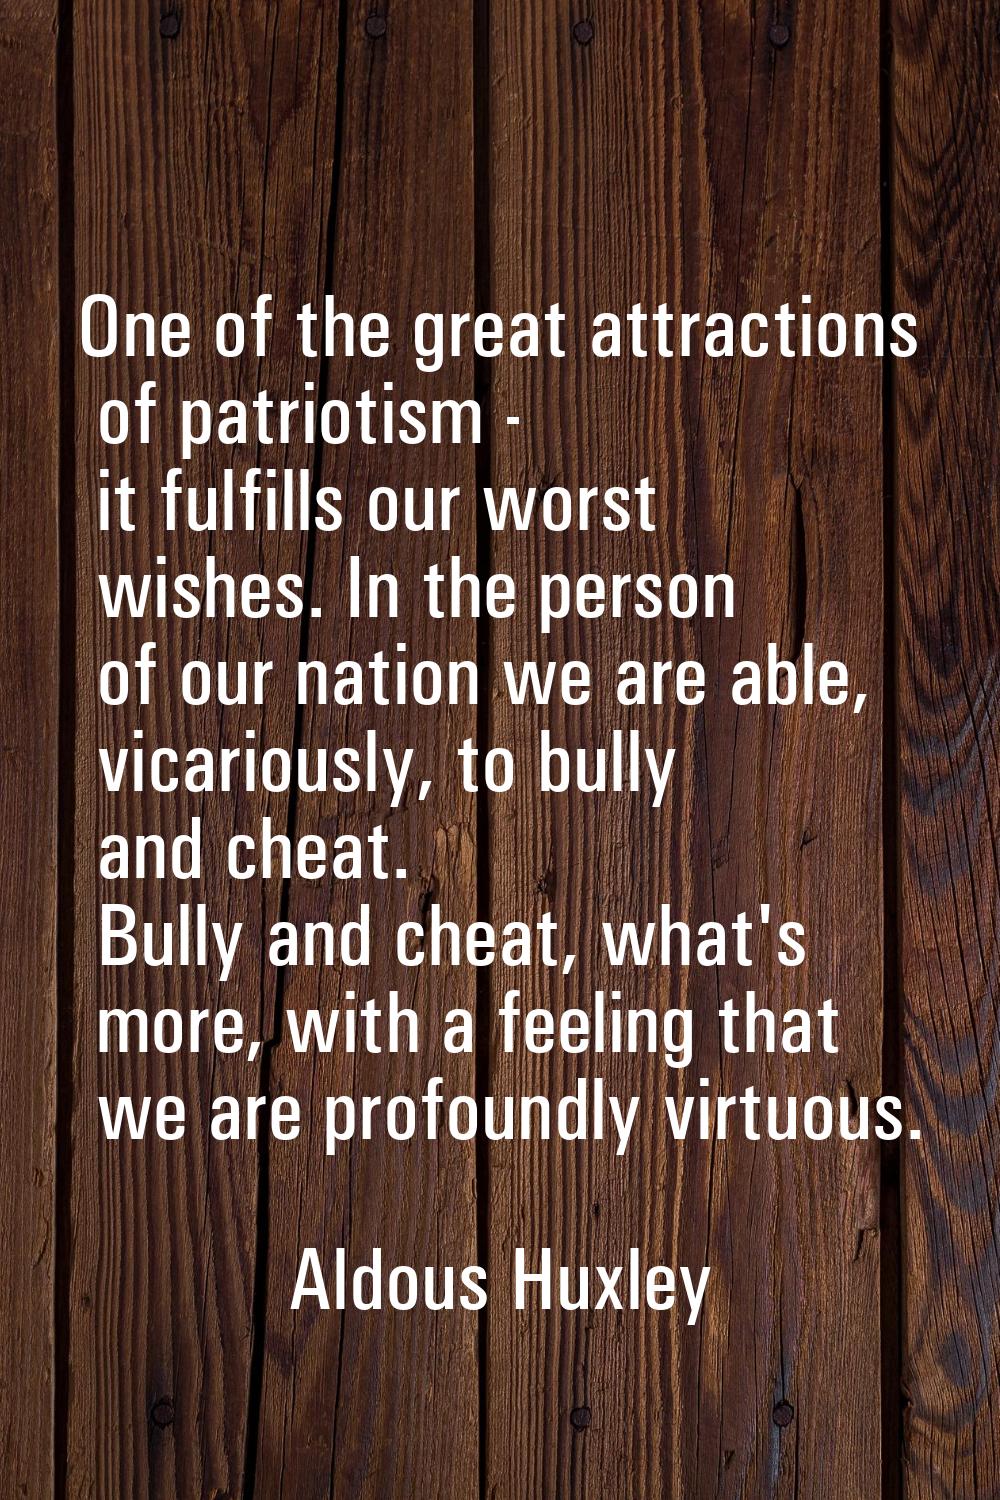 One of the great attractions of patriotism - it fulfills our worst wishes. In the person of our nat